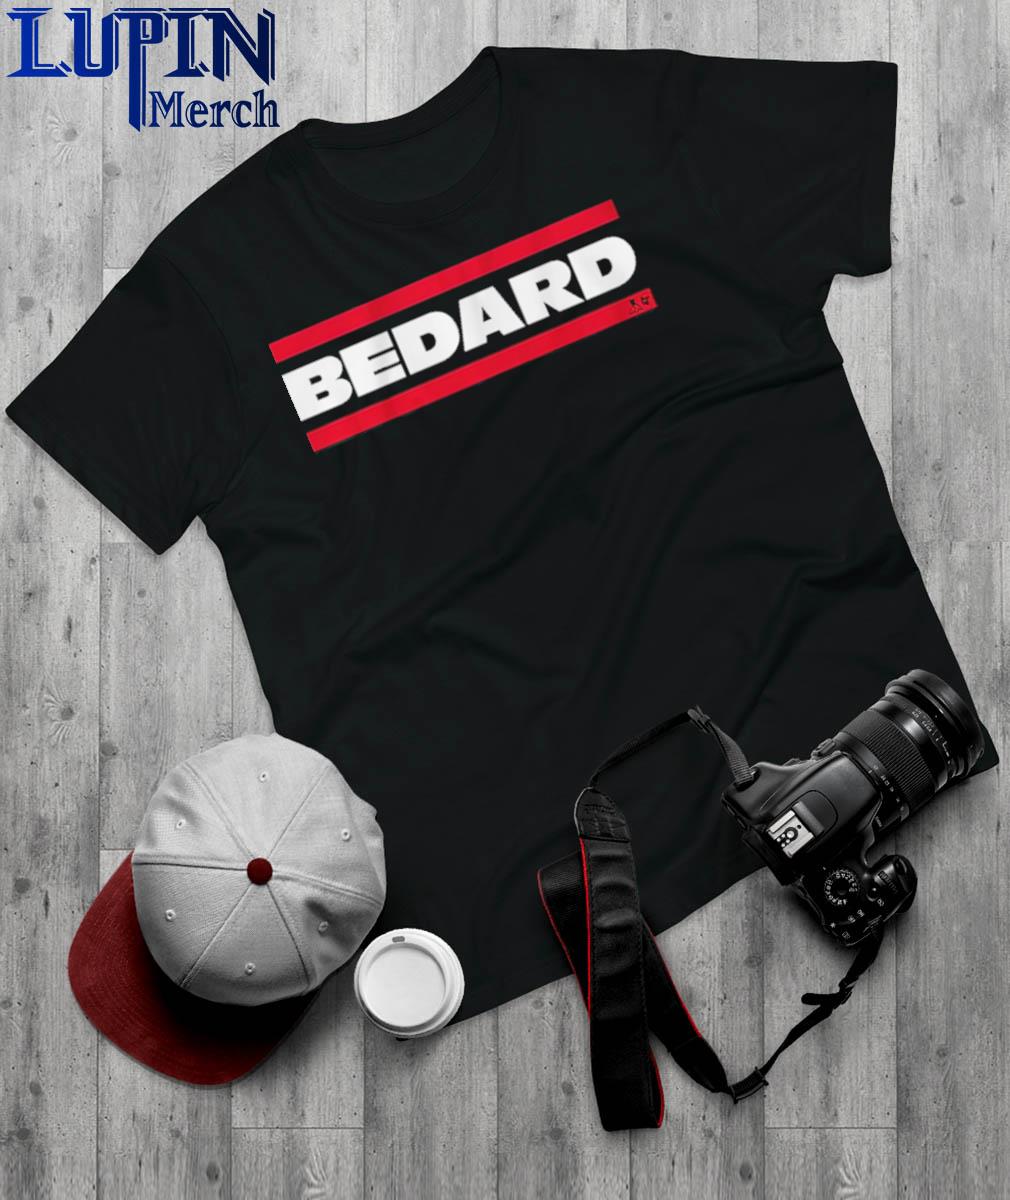 Connor Bedard merchandise already becoming hot item for Chicago